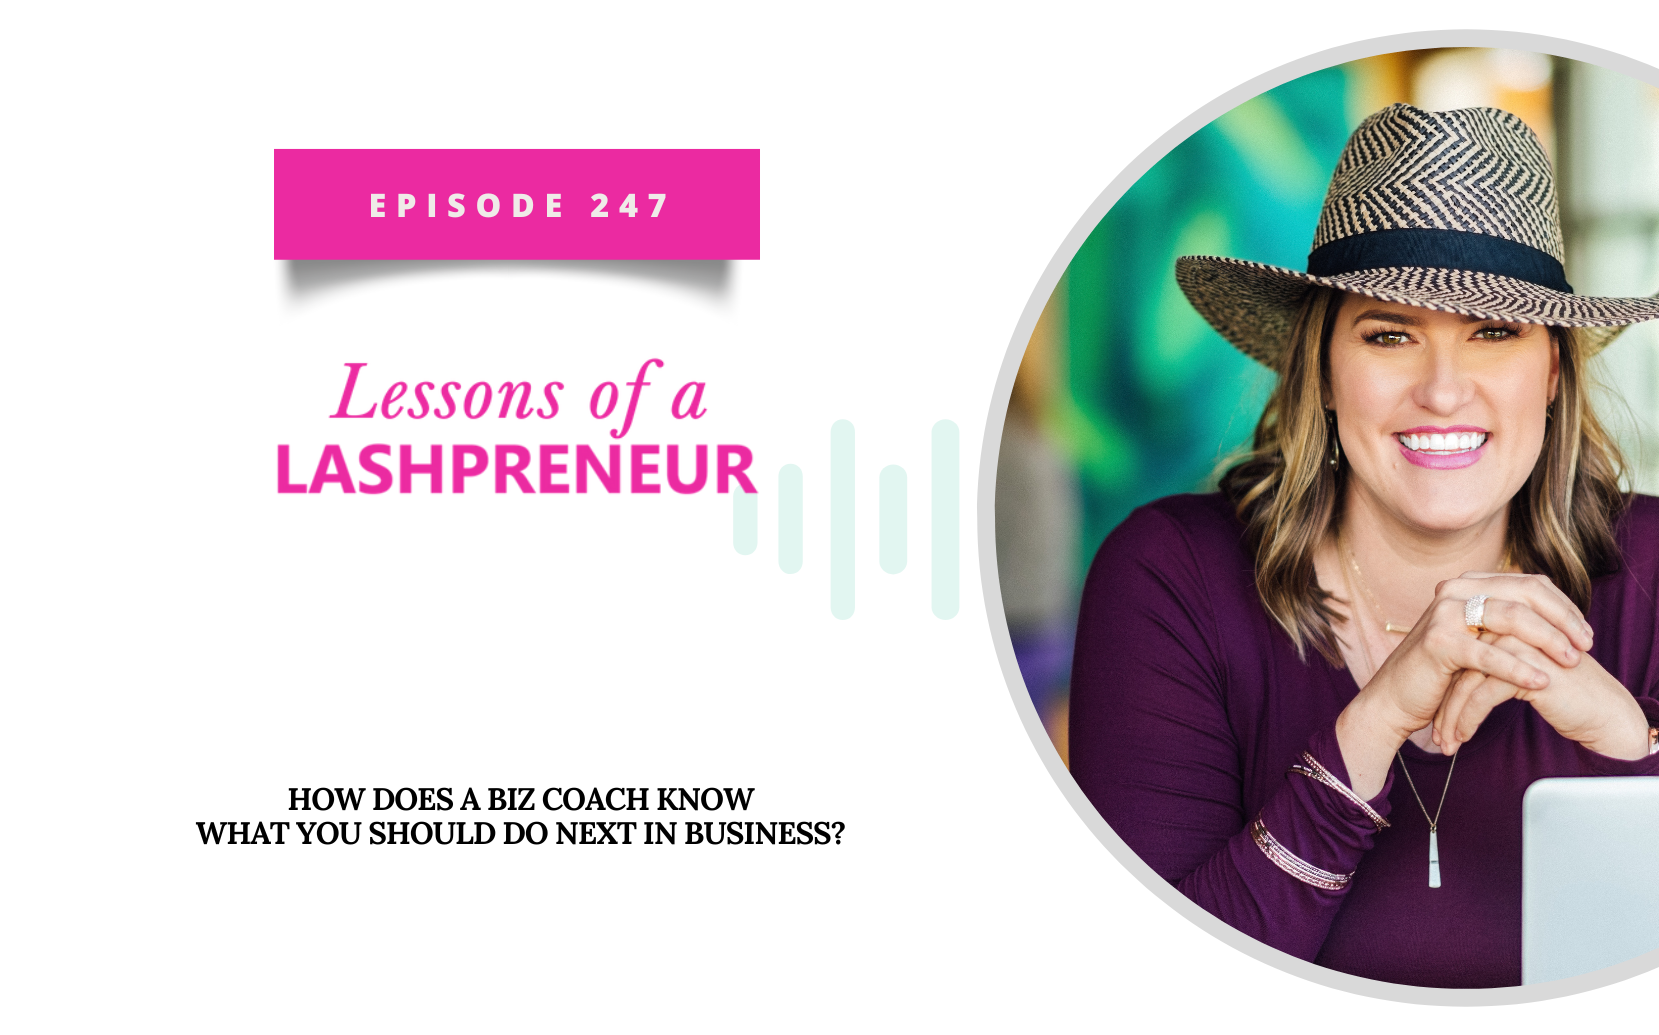 How Does A Biz Coach Know What You Should Do Next In Business?